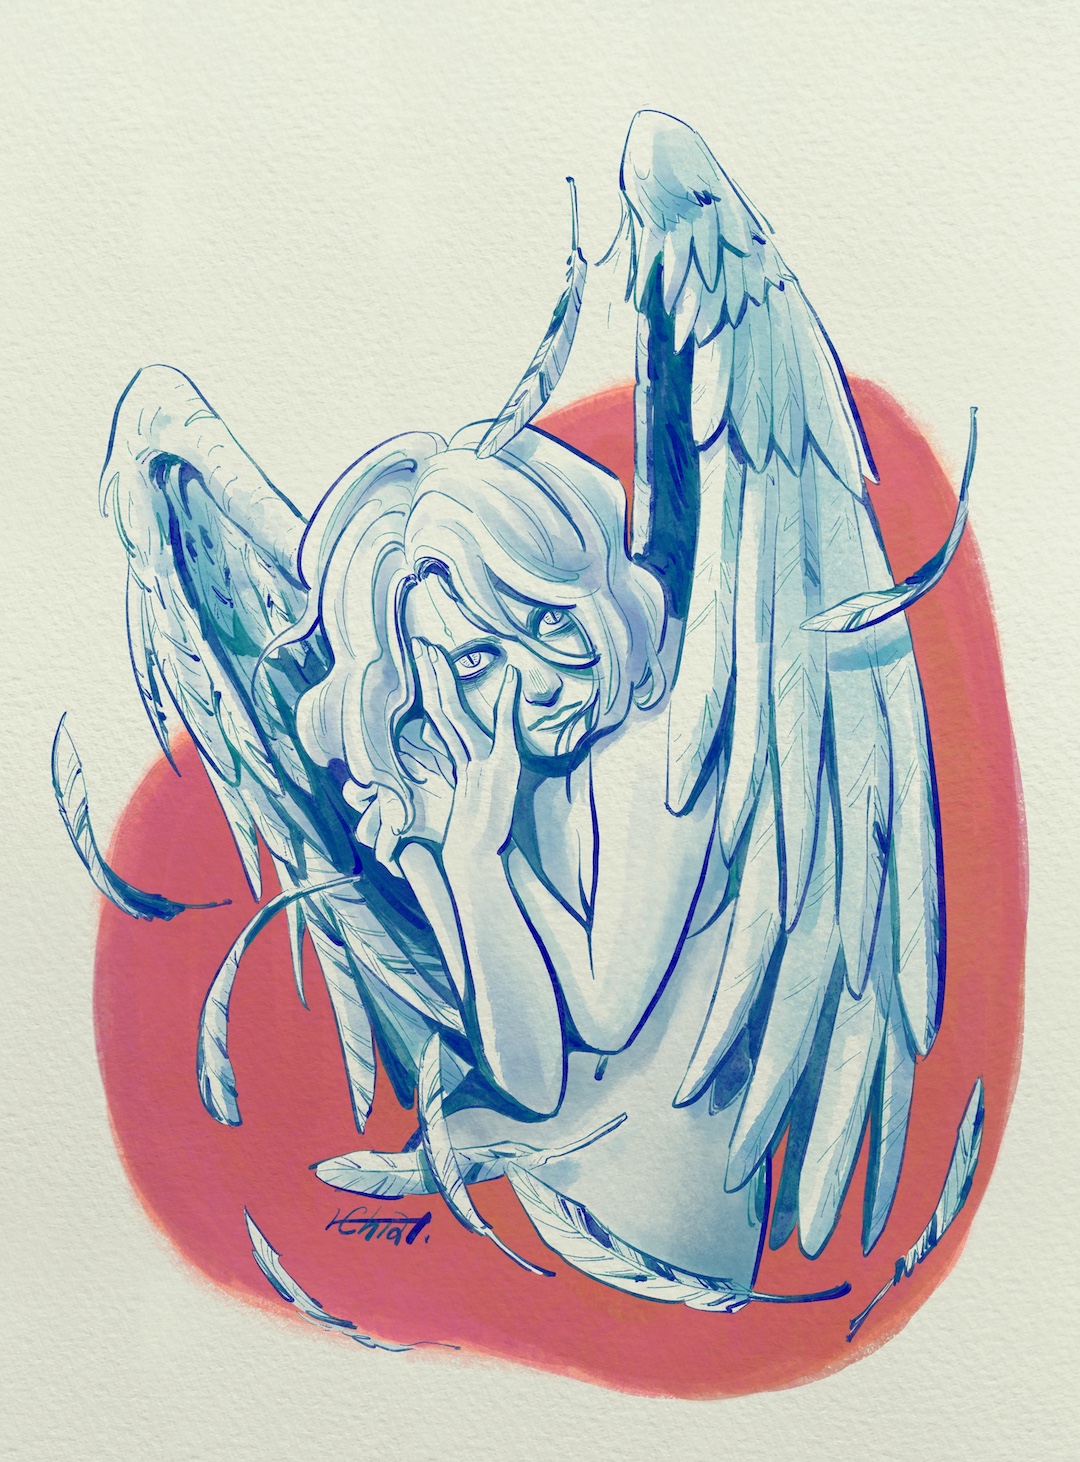 gothic style illustration of a depraved angel by H. chia 笳彧